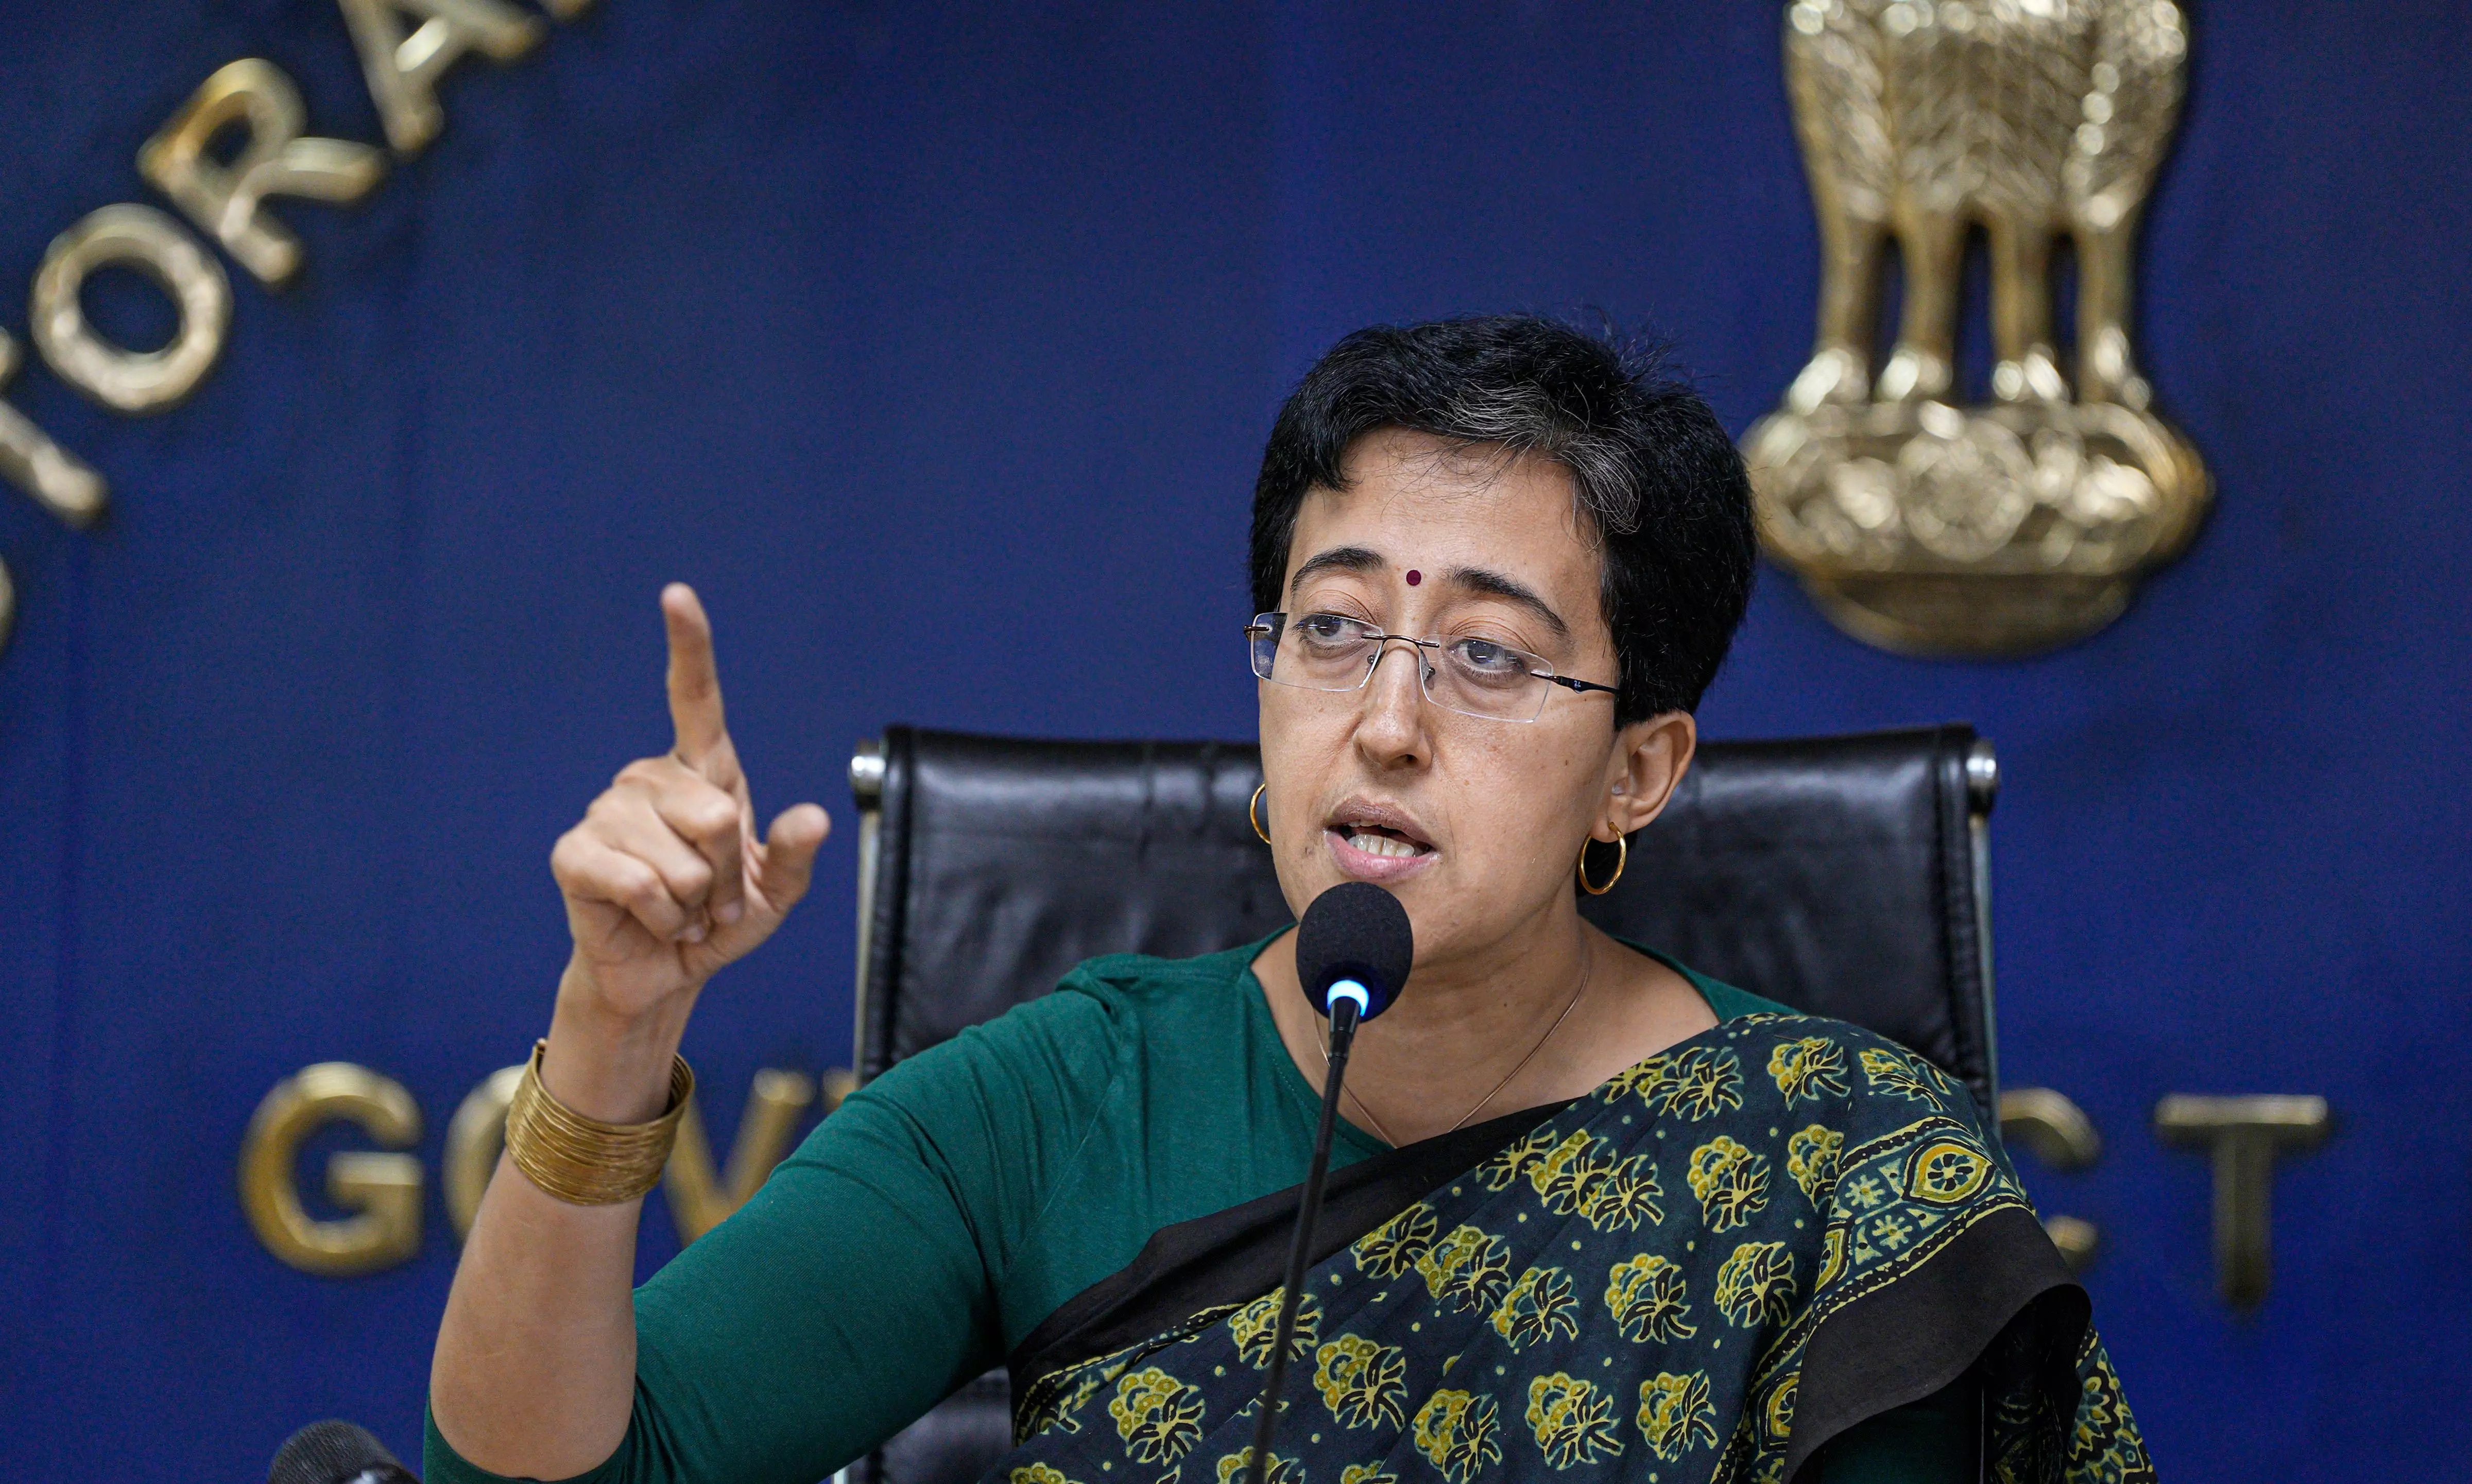 Guard water pipelines: Delhi minister Atishi asks police to deploy more patrols